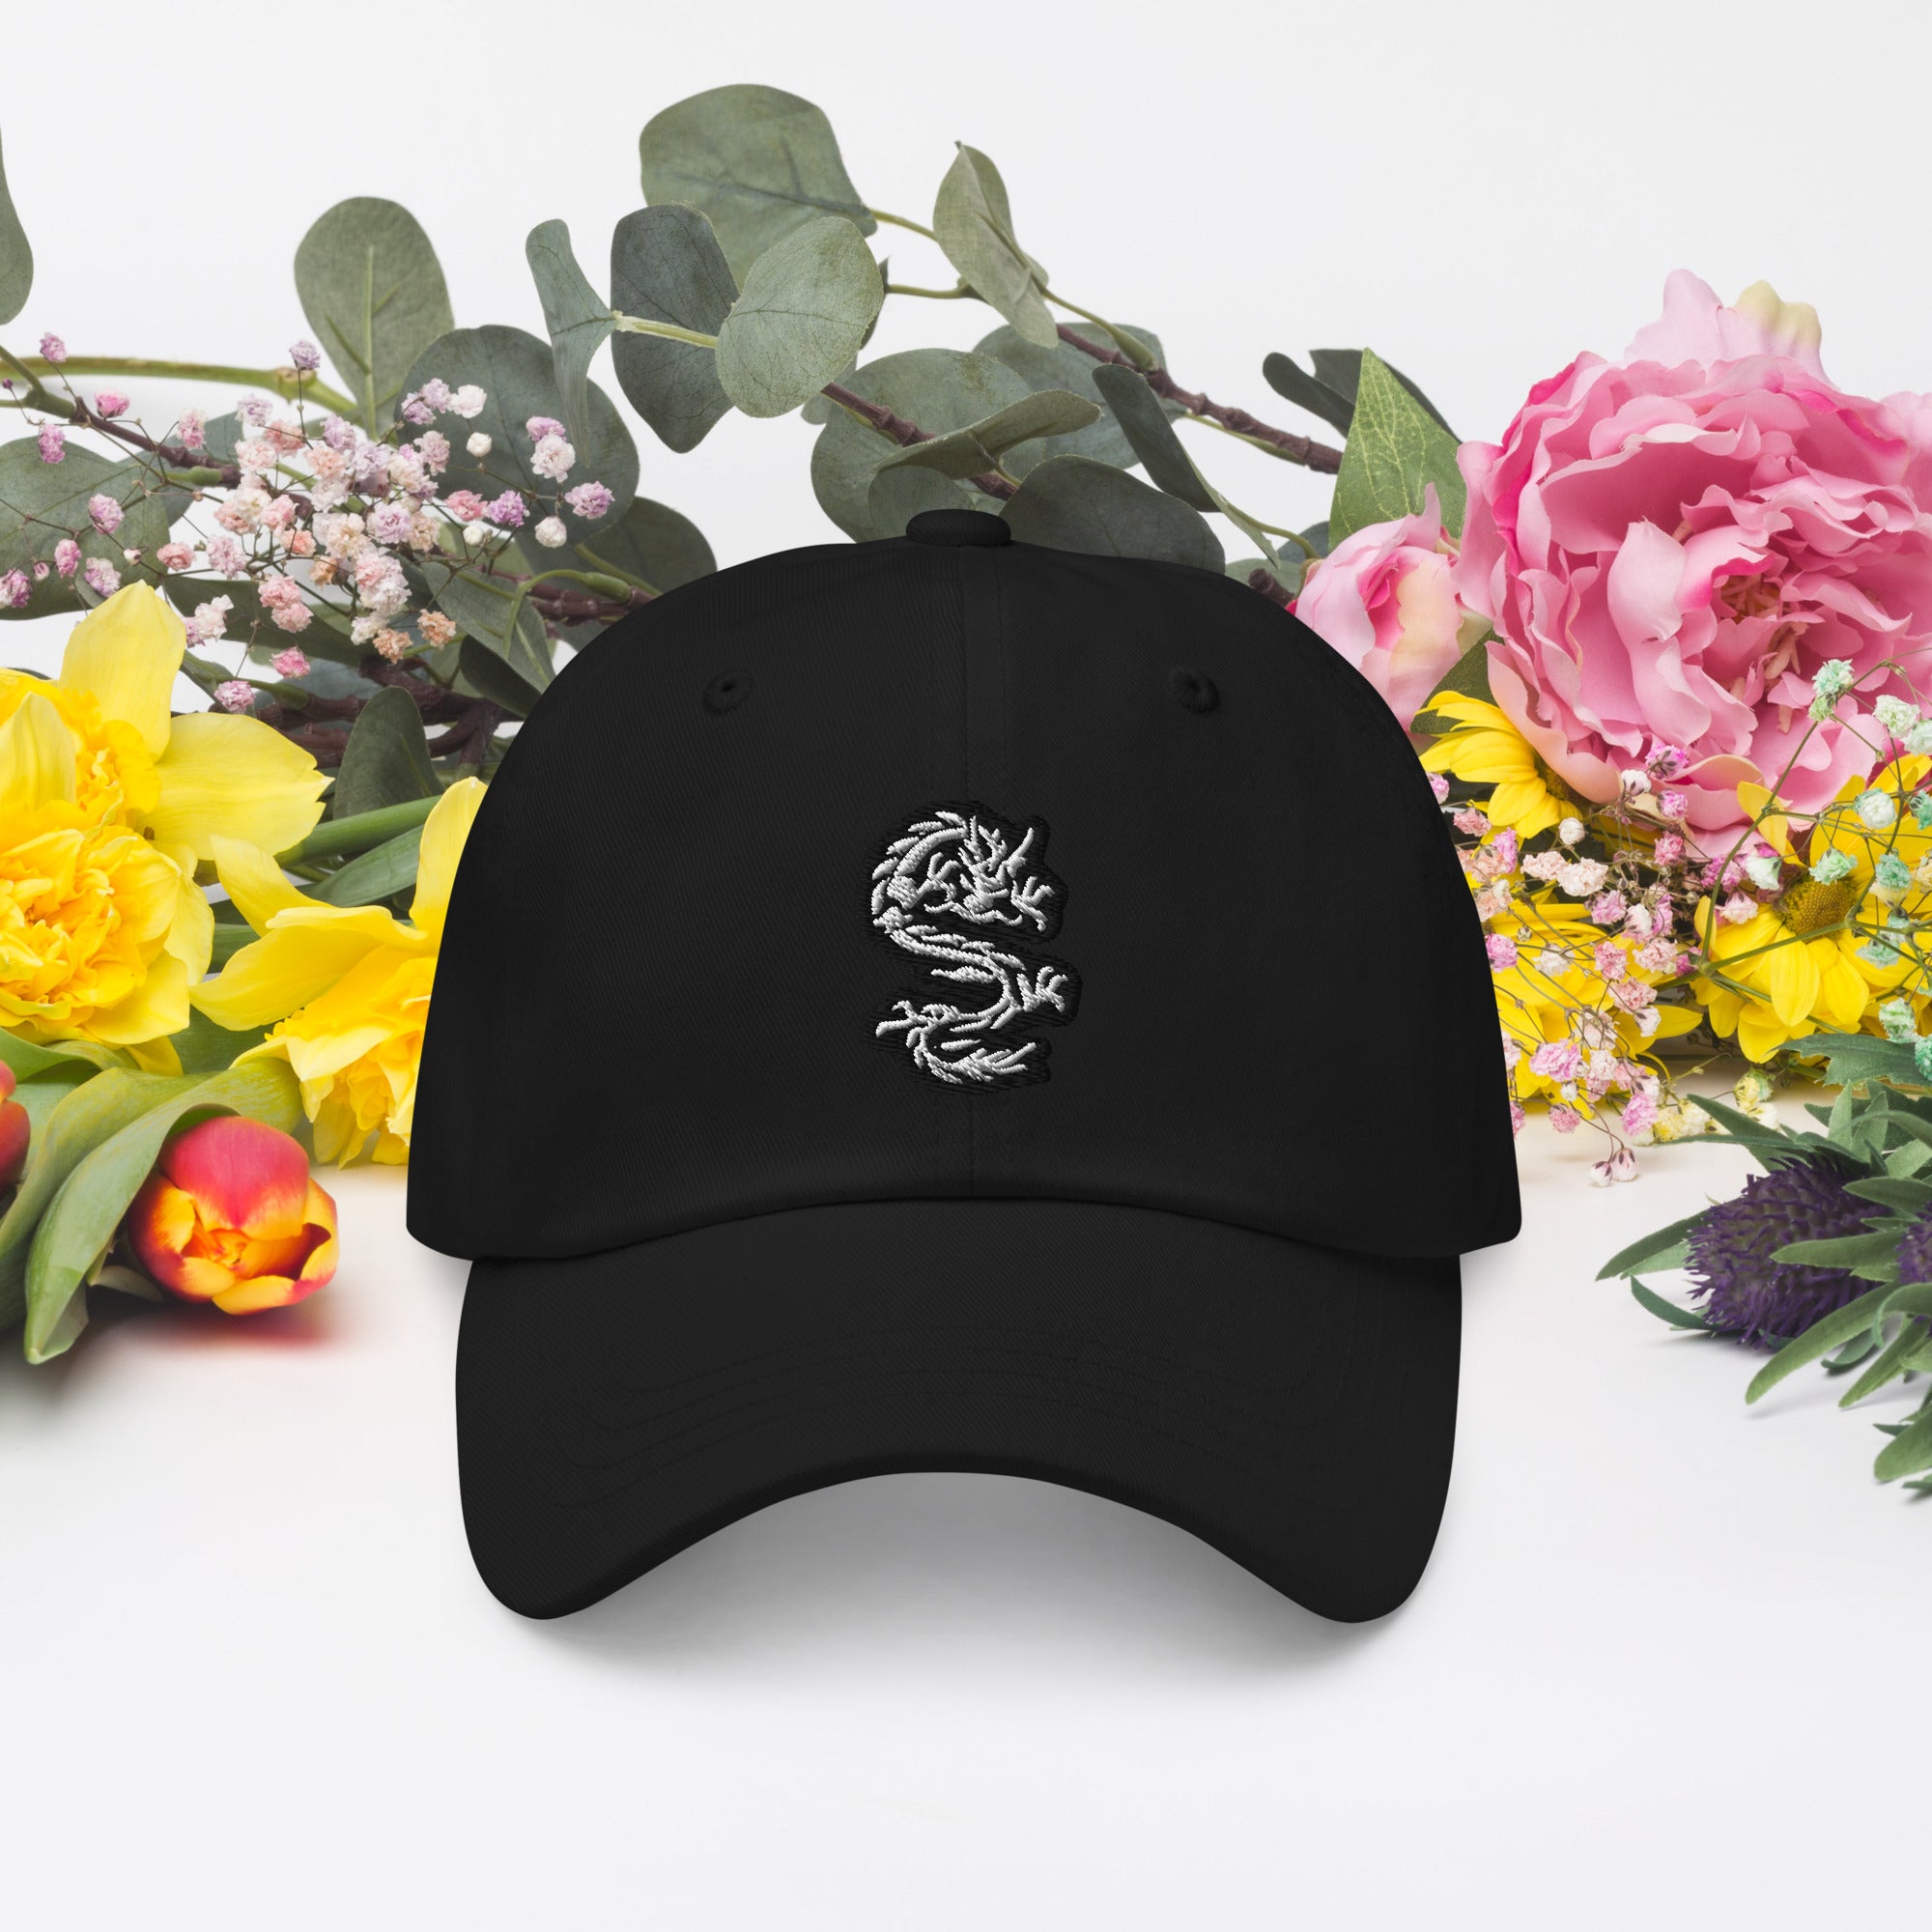 Ancient Chinese Dragon Embroidered Baseball Cap Mythology and Folklore Dad hat - Edge of Life Designs